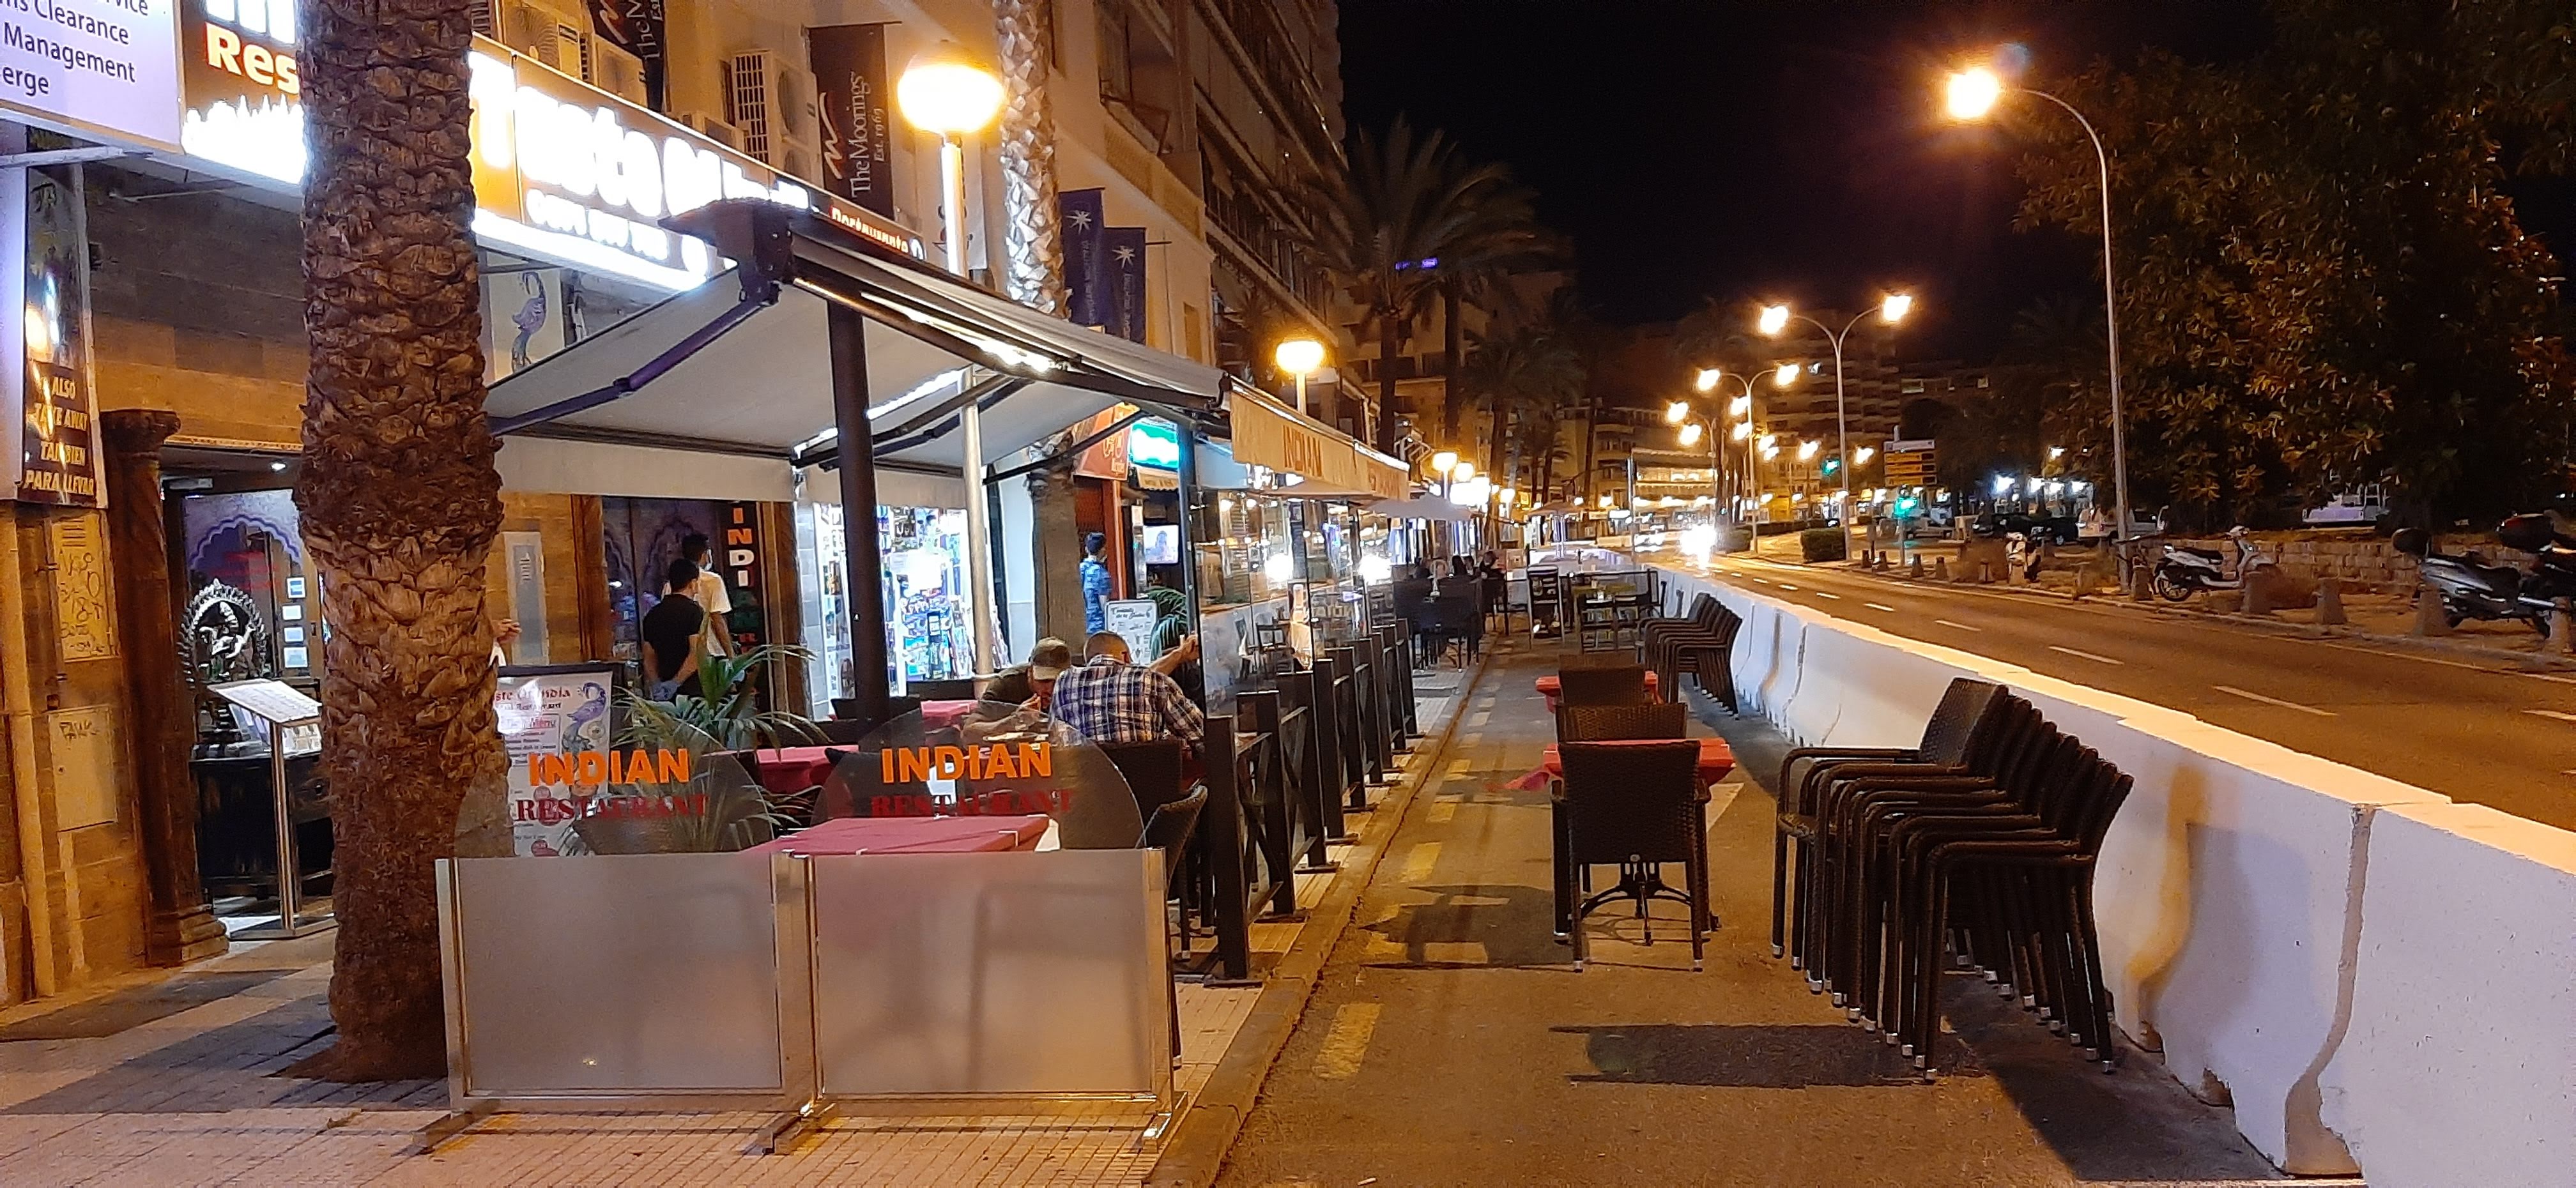 The APB reminds owners of restaurants with terraces on Palma’s seafront promenade to comply with closing times